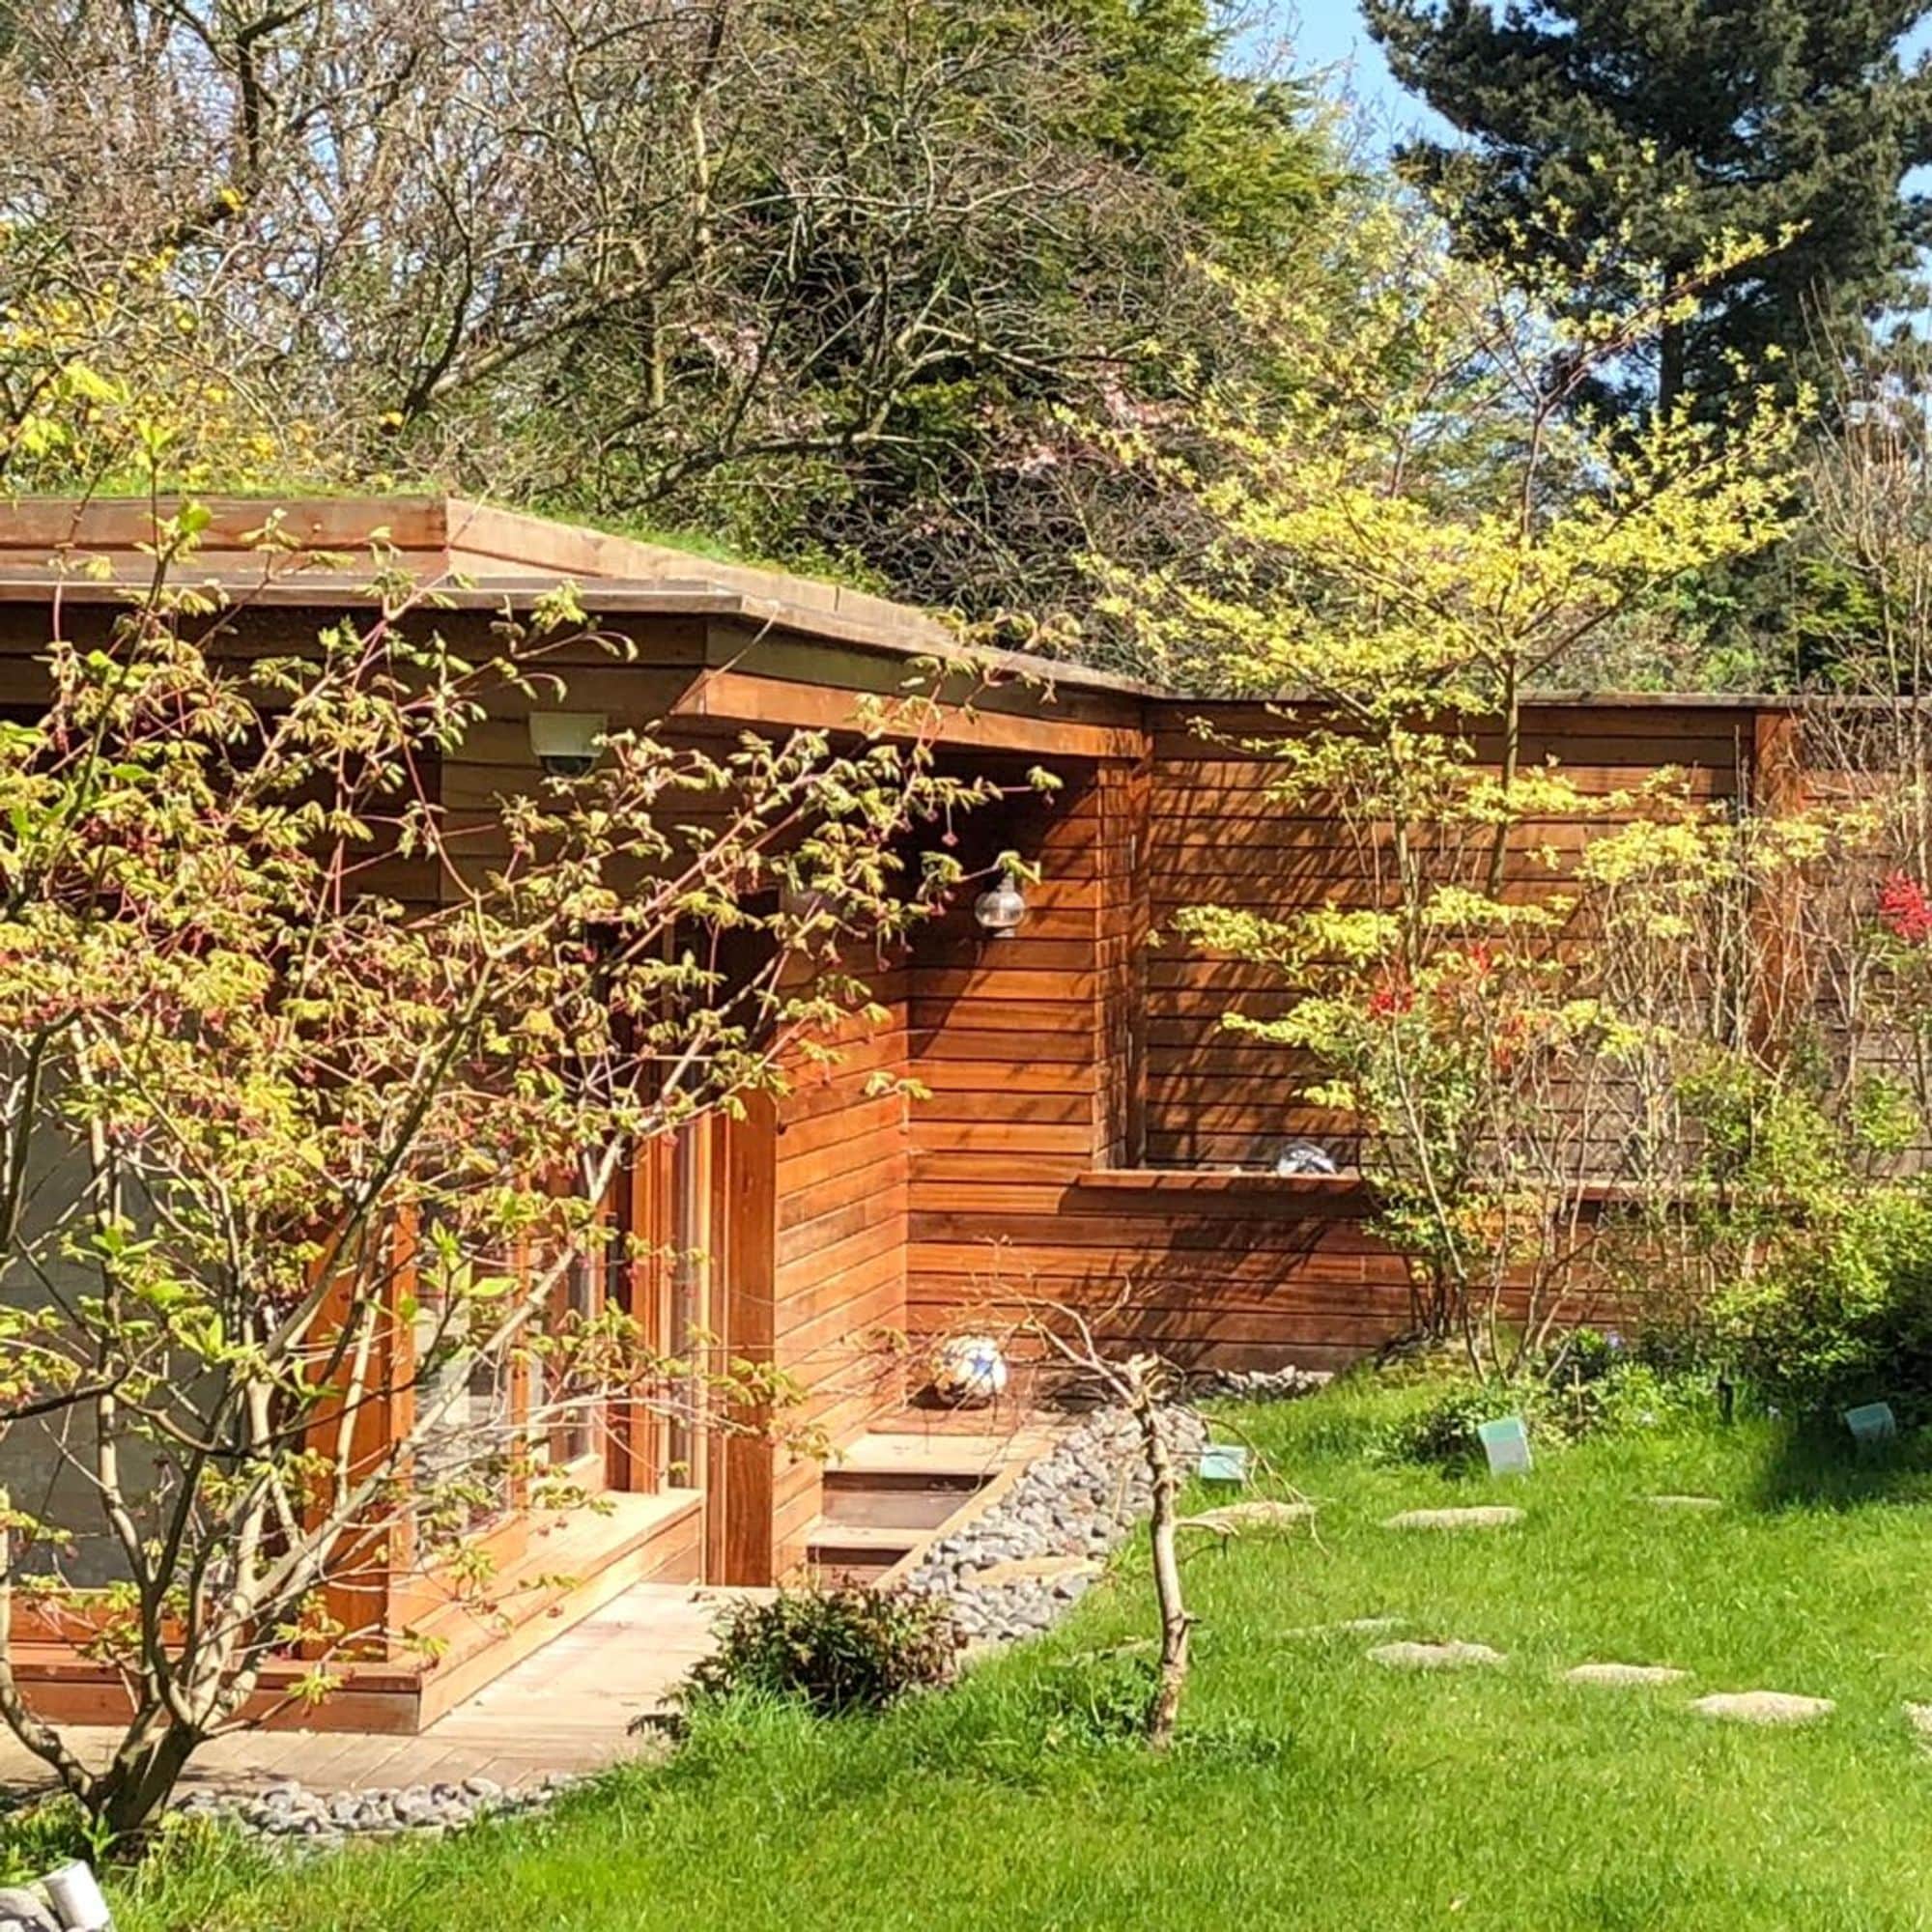 A large shed featuring the benefits of a green roof surrounded by greenery and wildlife in a modern garden